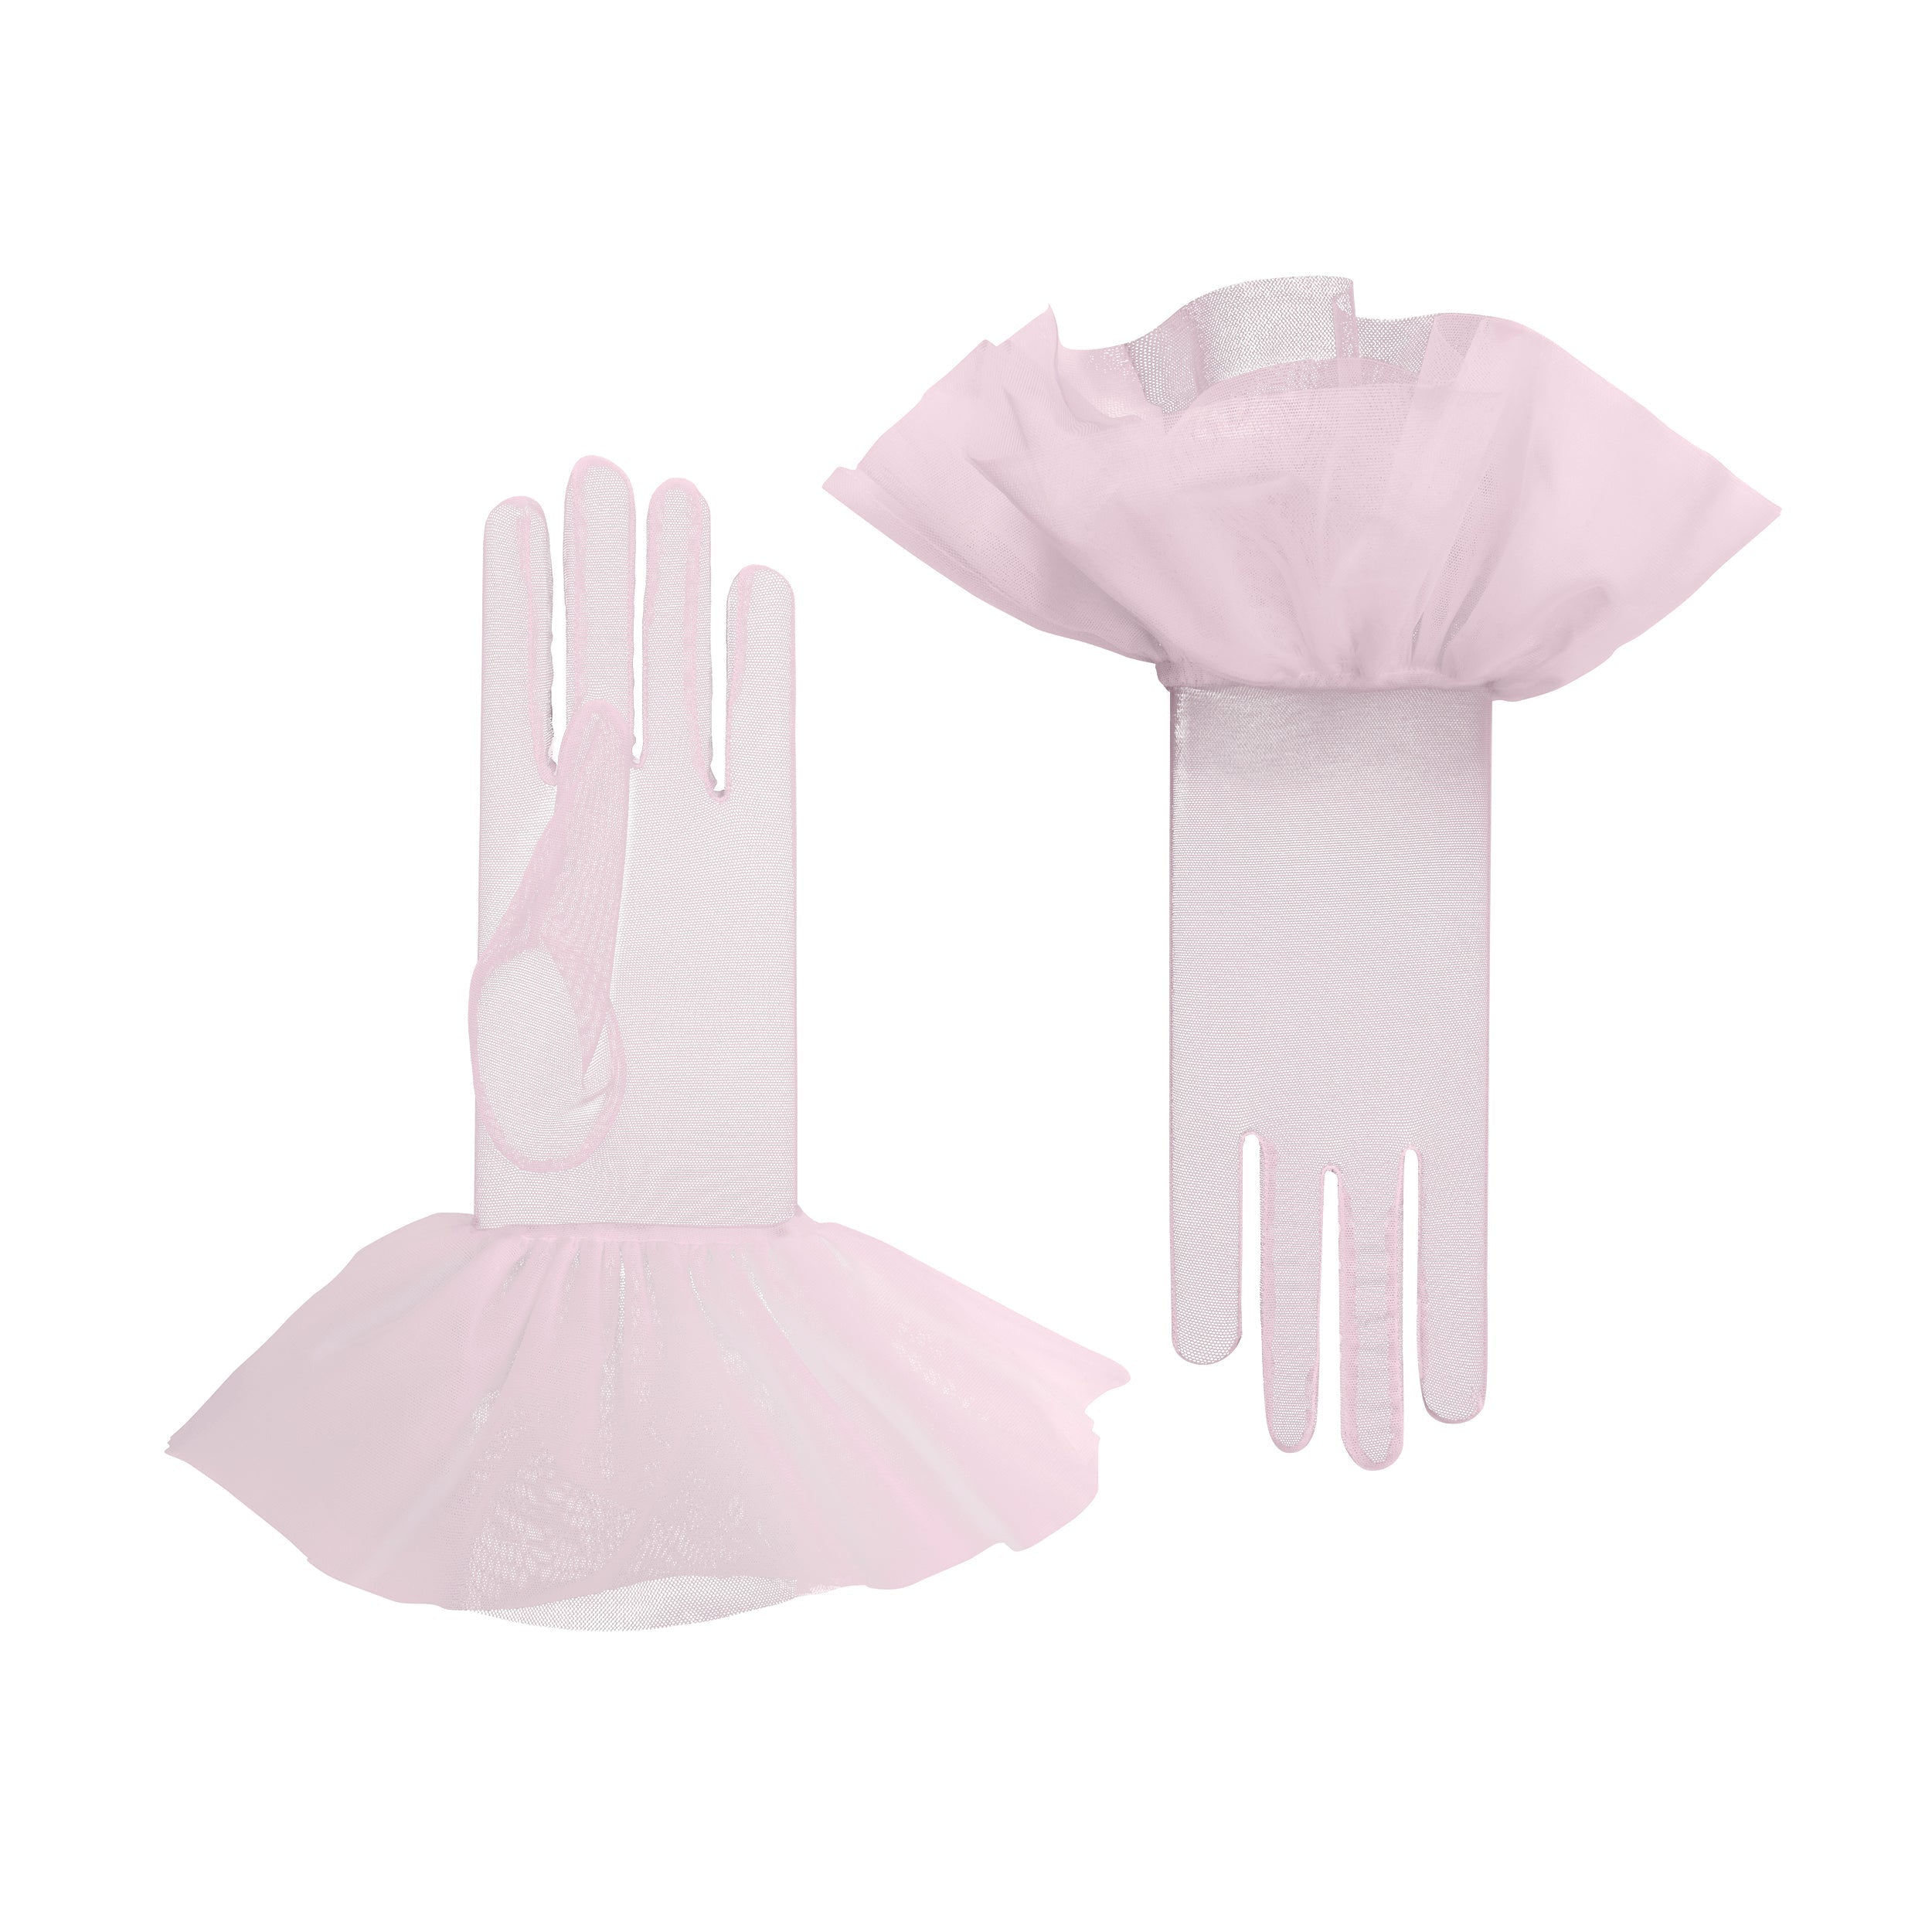 Cornelia James - Pink Tulle Gloves with Harlequin Cuff - Lara - Size Large (8½) - Handmade Tulle Gloves by Cornelia James